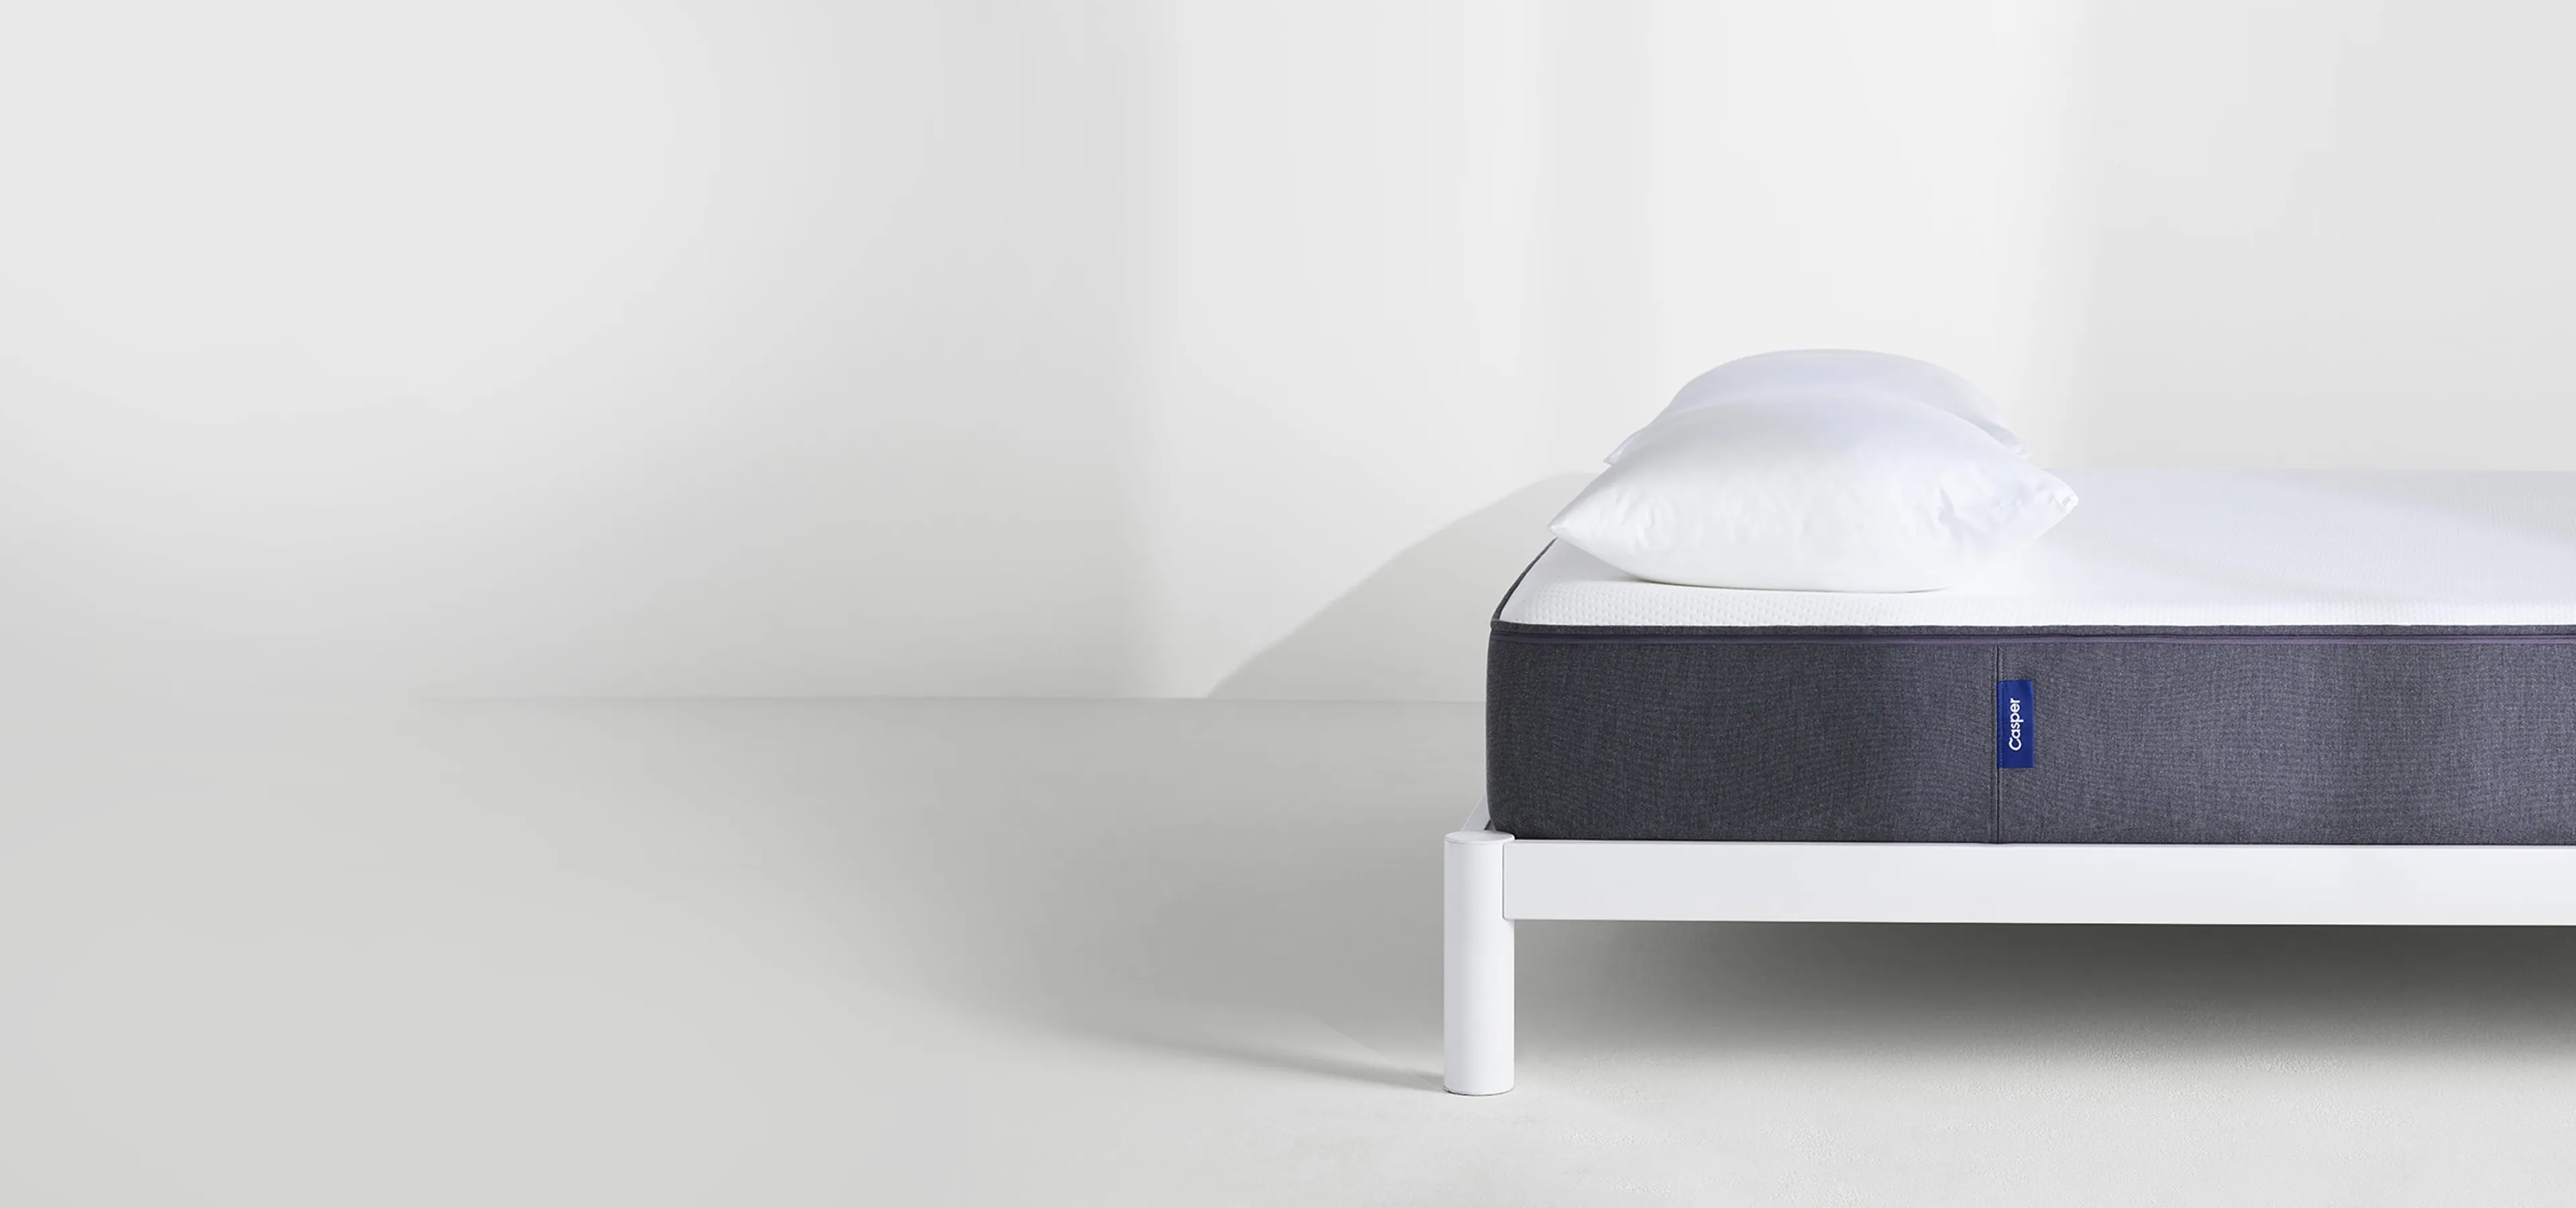 Casper mattress with blue tag featured by Rodd